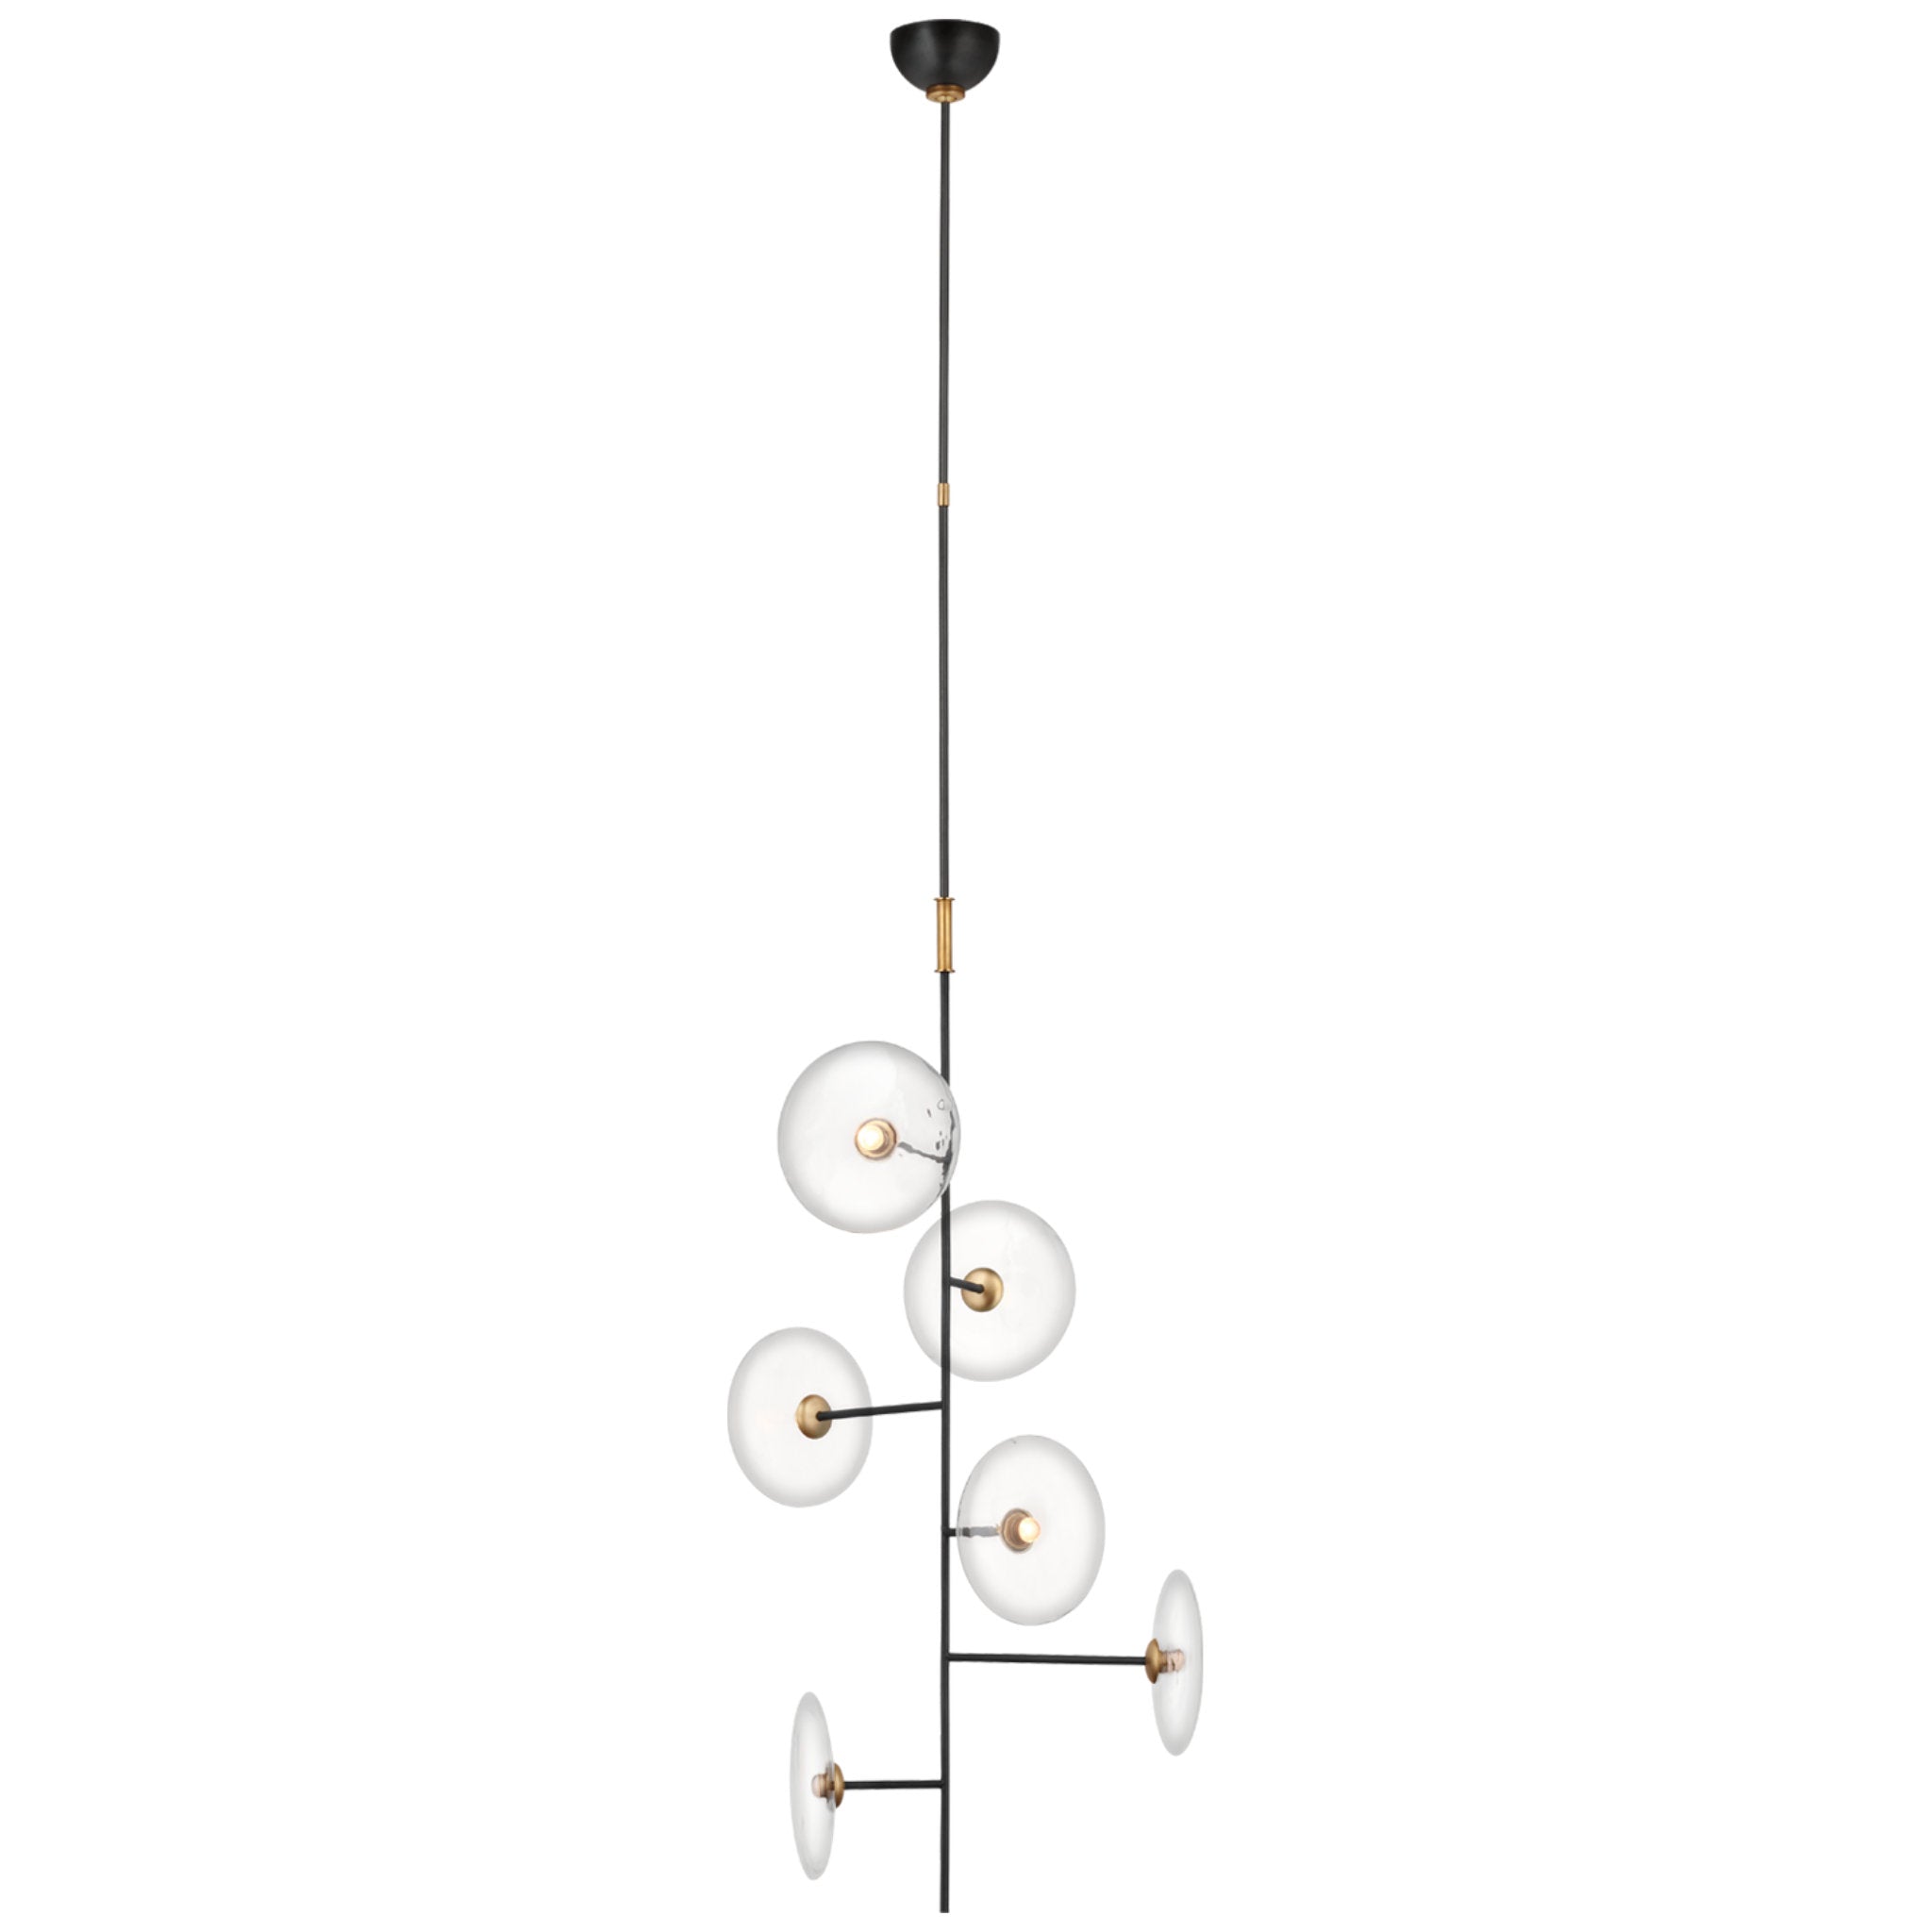 Ian K. Fowler Calvino Small Entry Chandelier in Aged Iron and Hand-Rubbed Antique Brass with Clear Glass